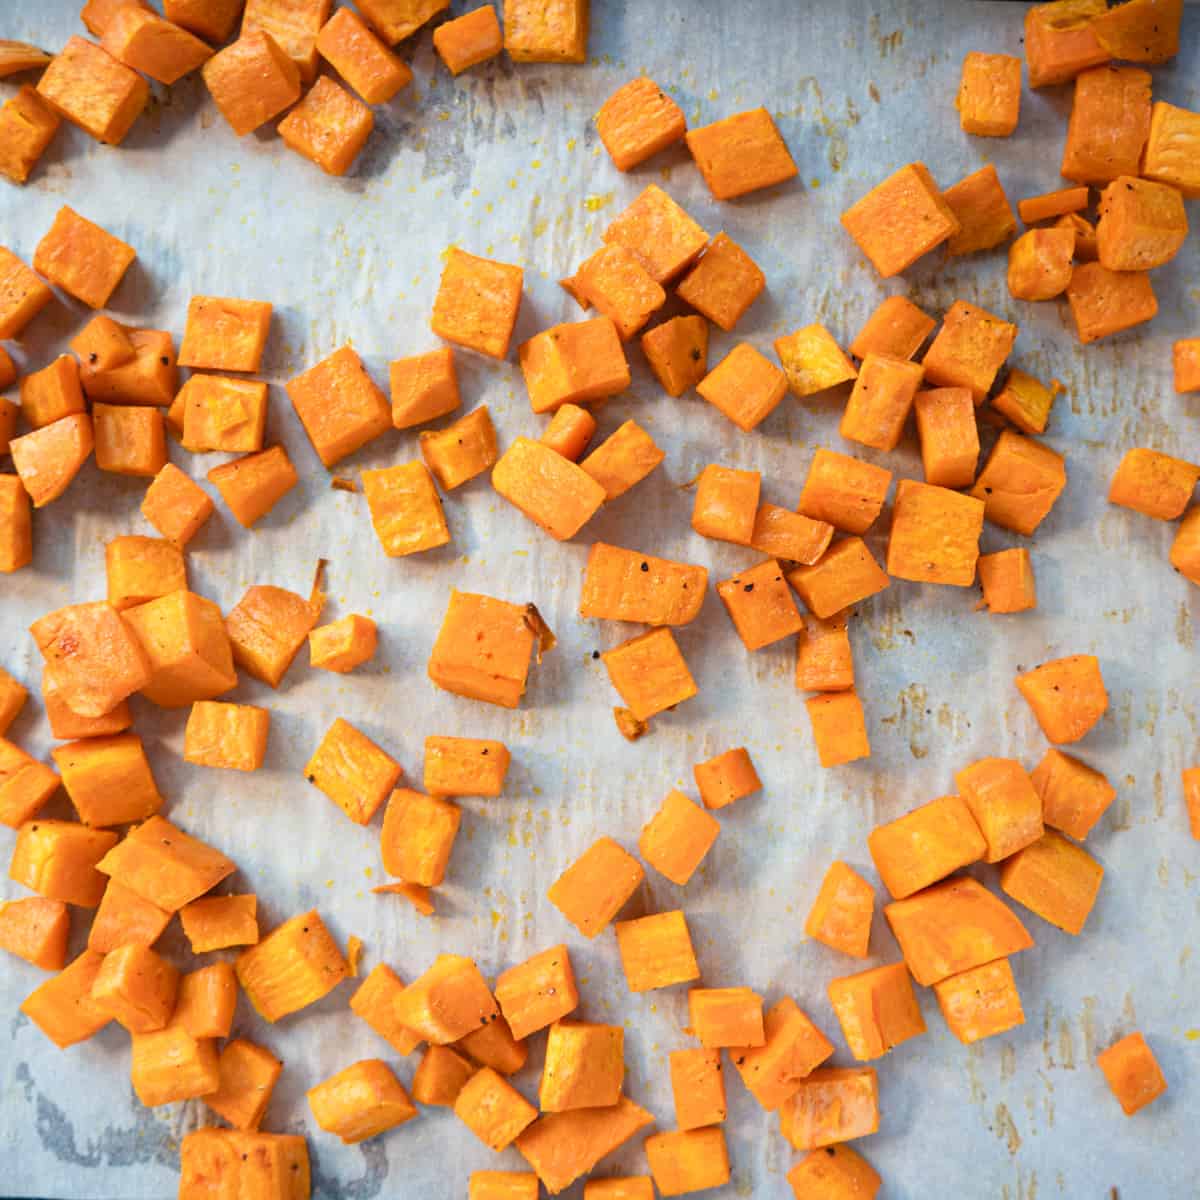 cubed sweet potato on a parchment lined baking tray.